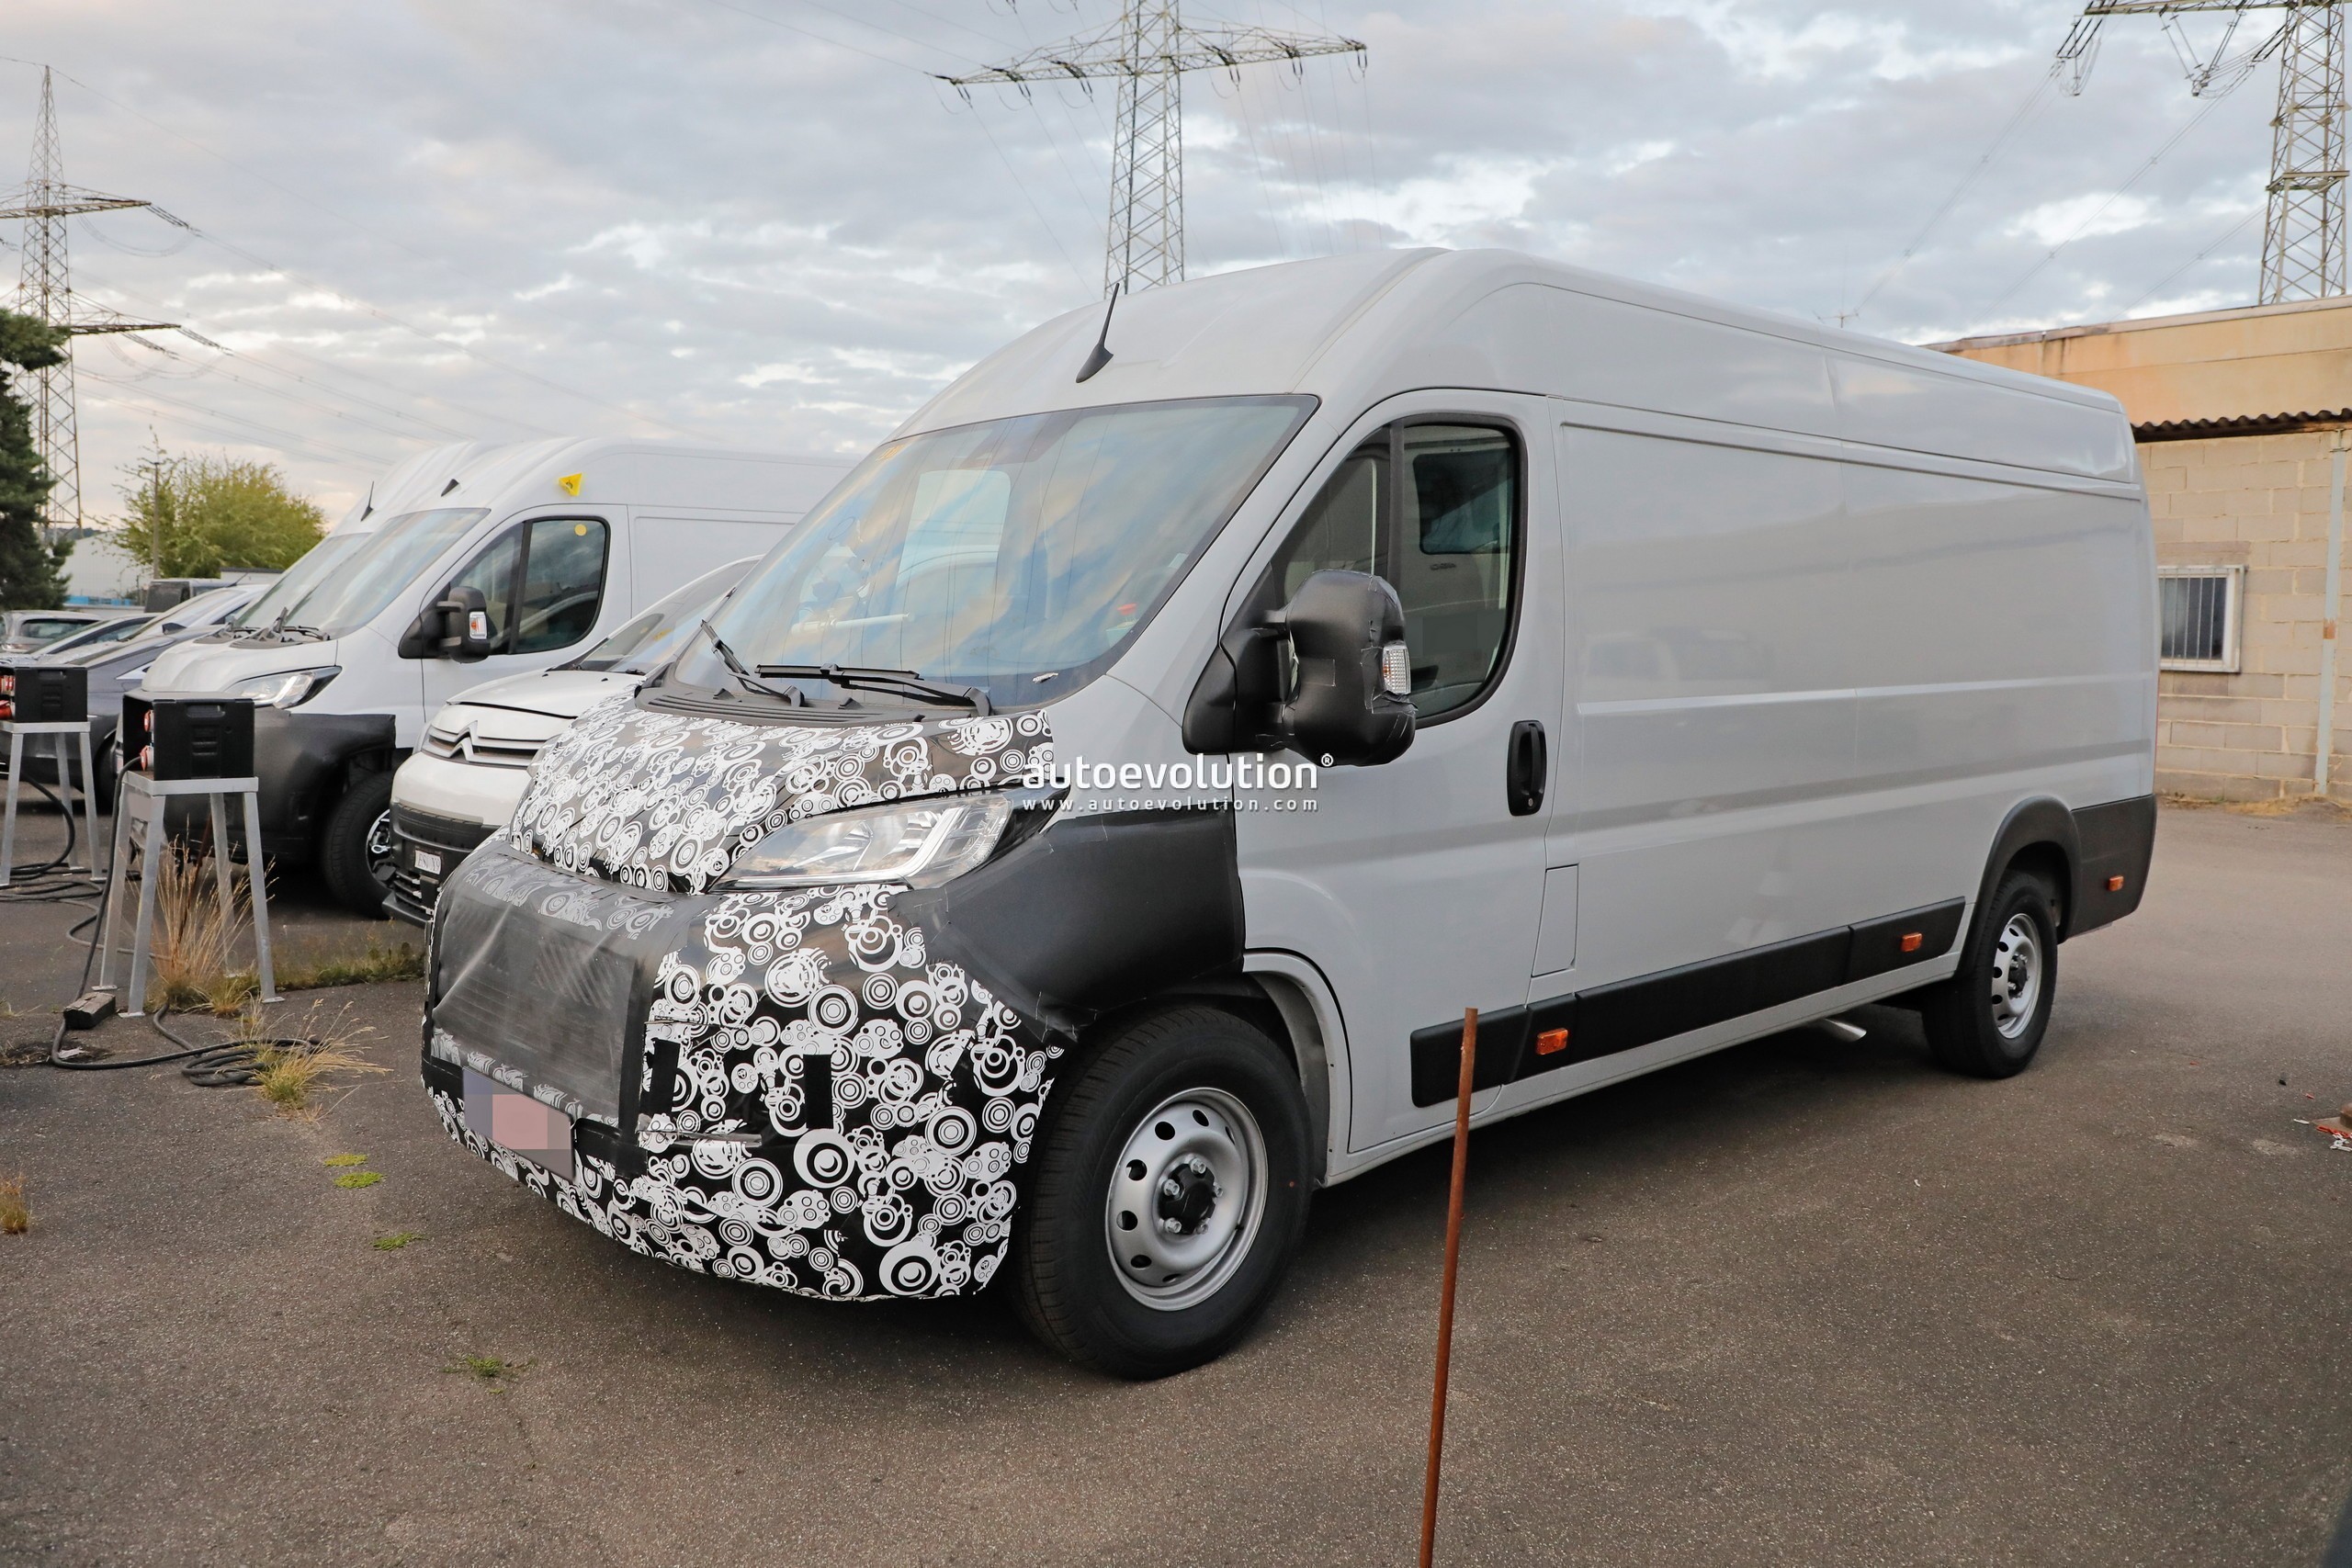 New FIAT Ducato Overview  Should You Buy One In 2022? 